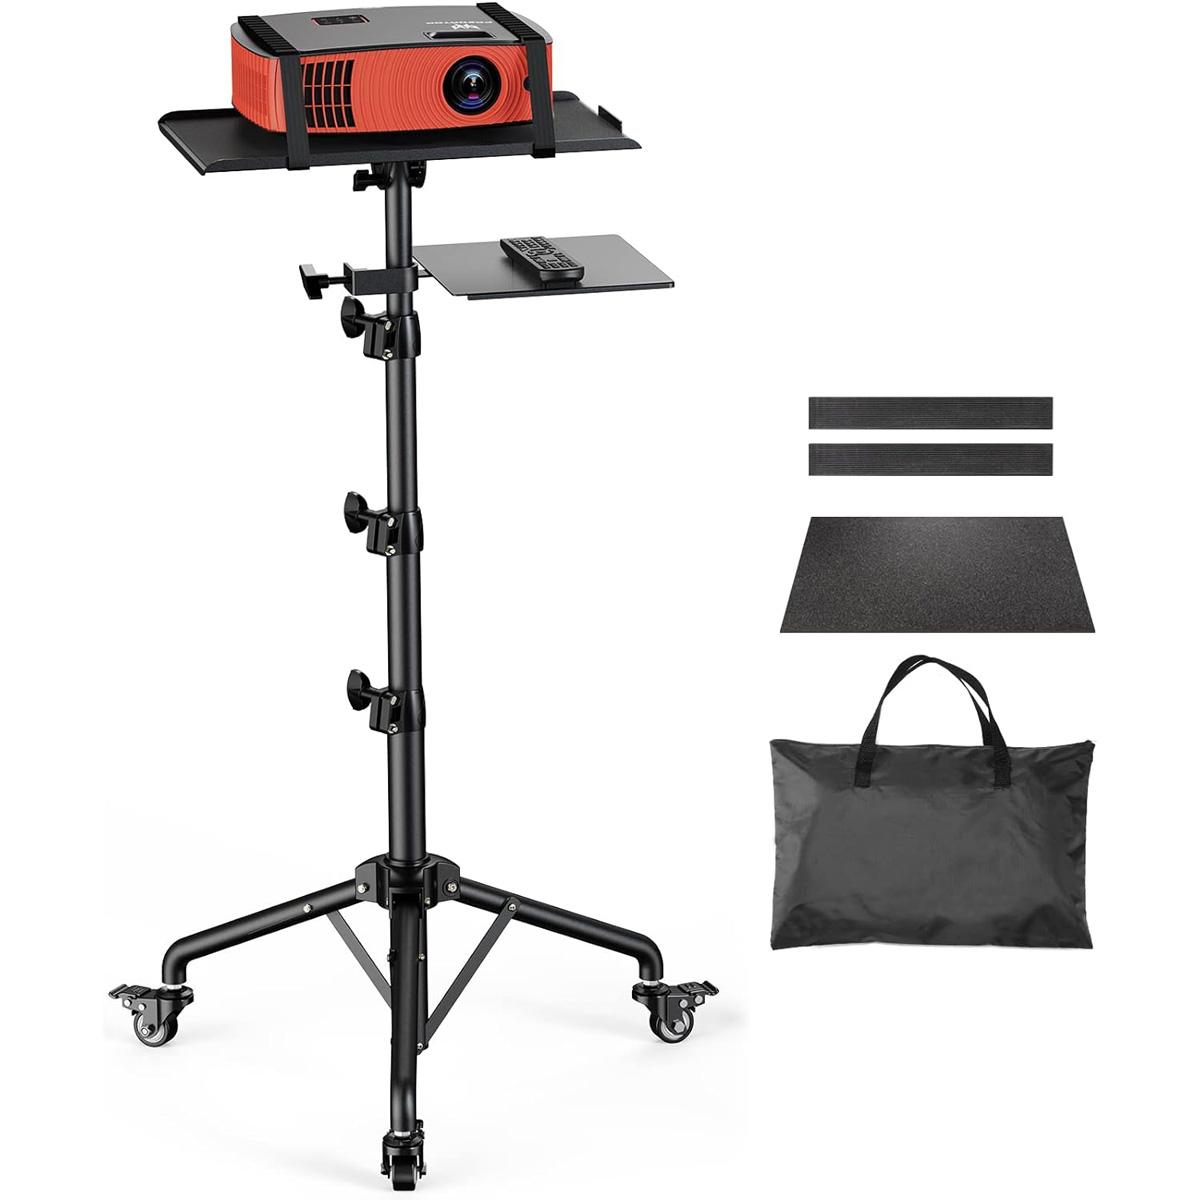 Amada Projector Laptop Tripod Stand with Bag for $25.70 shipped